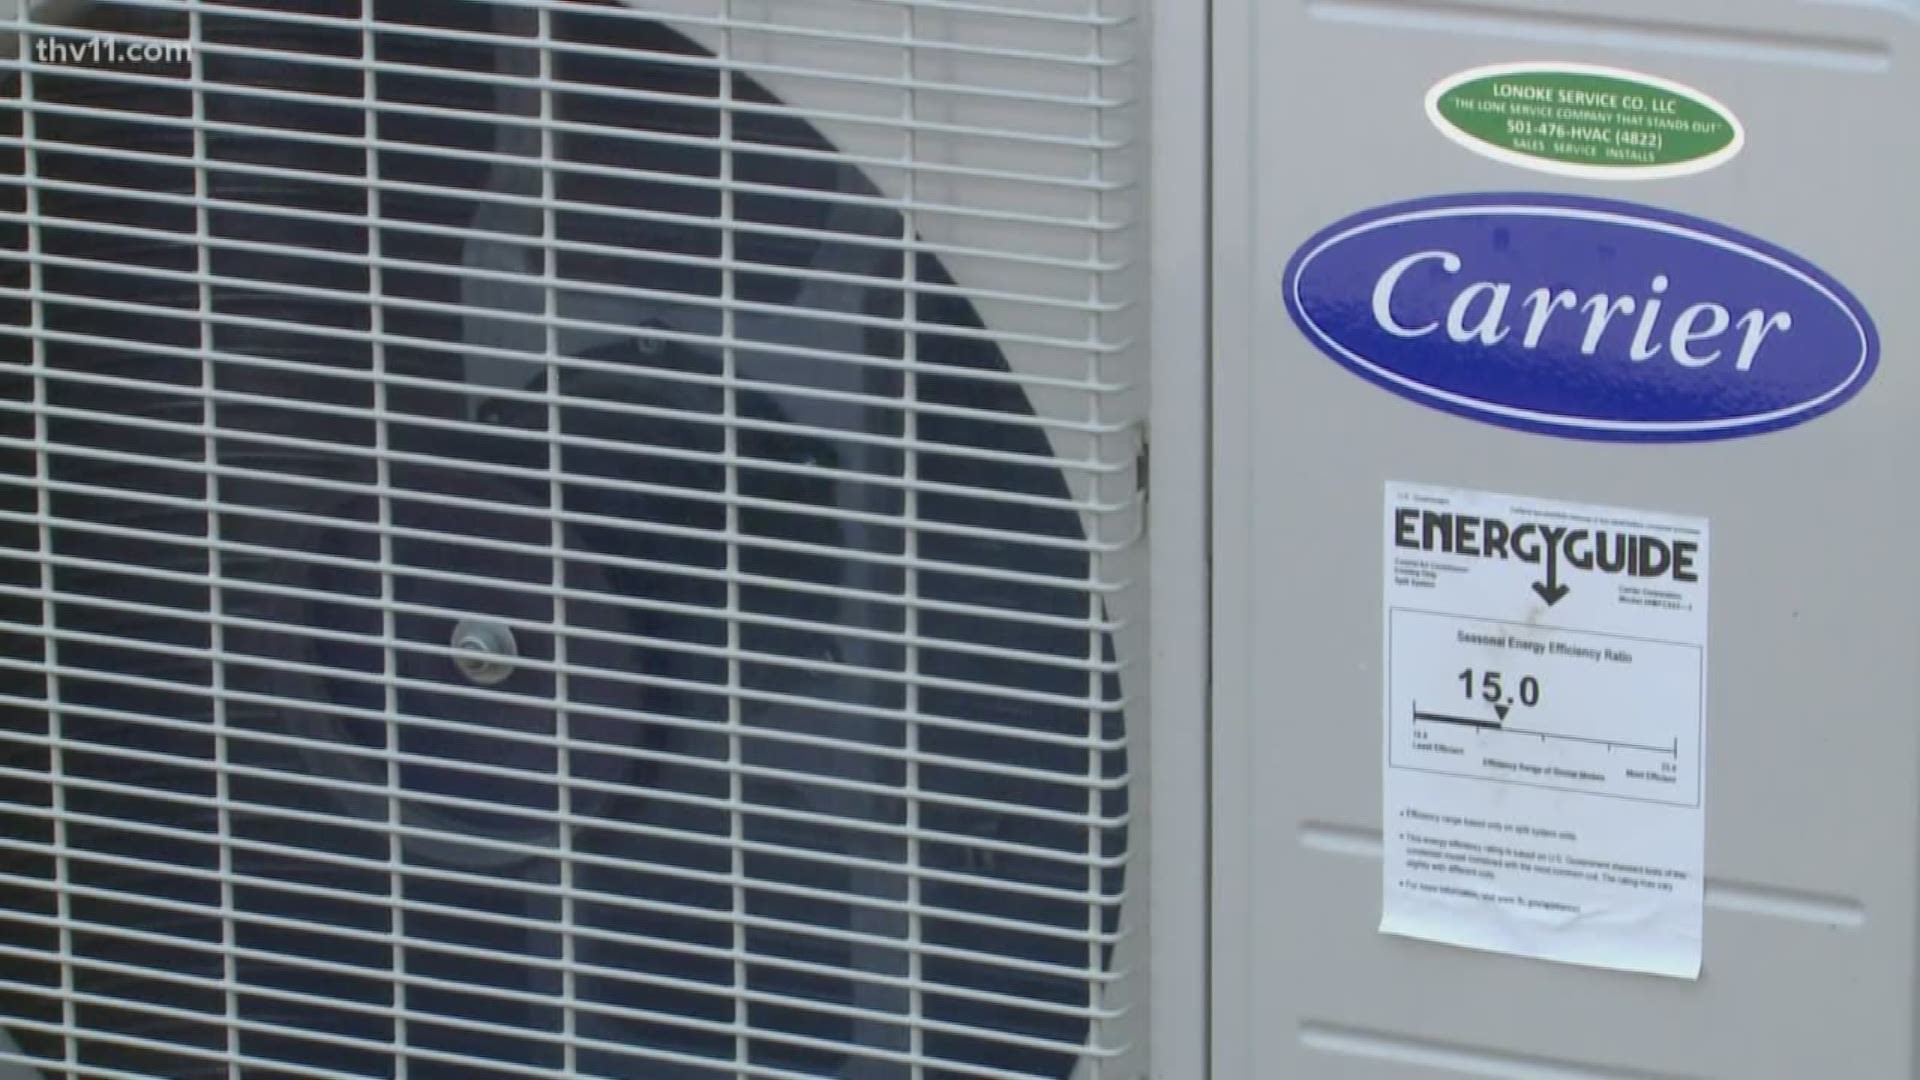 To avoid an even bigger bite in the budget as the heat waves continue, Entergy Arkansas, the state's largest electric utility company, is offering tips for regaining control of the thermostat now that tons of shocked customers call asking for help.